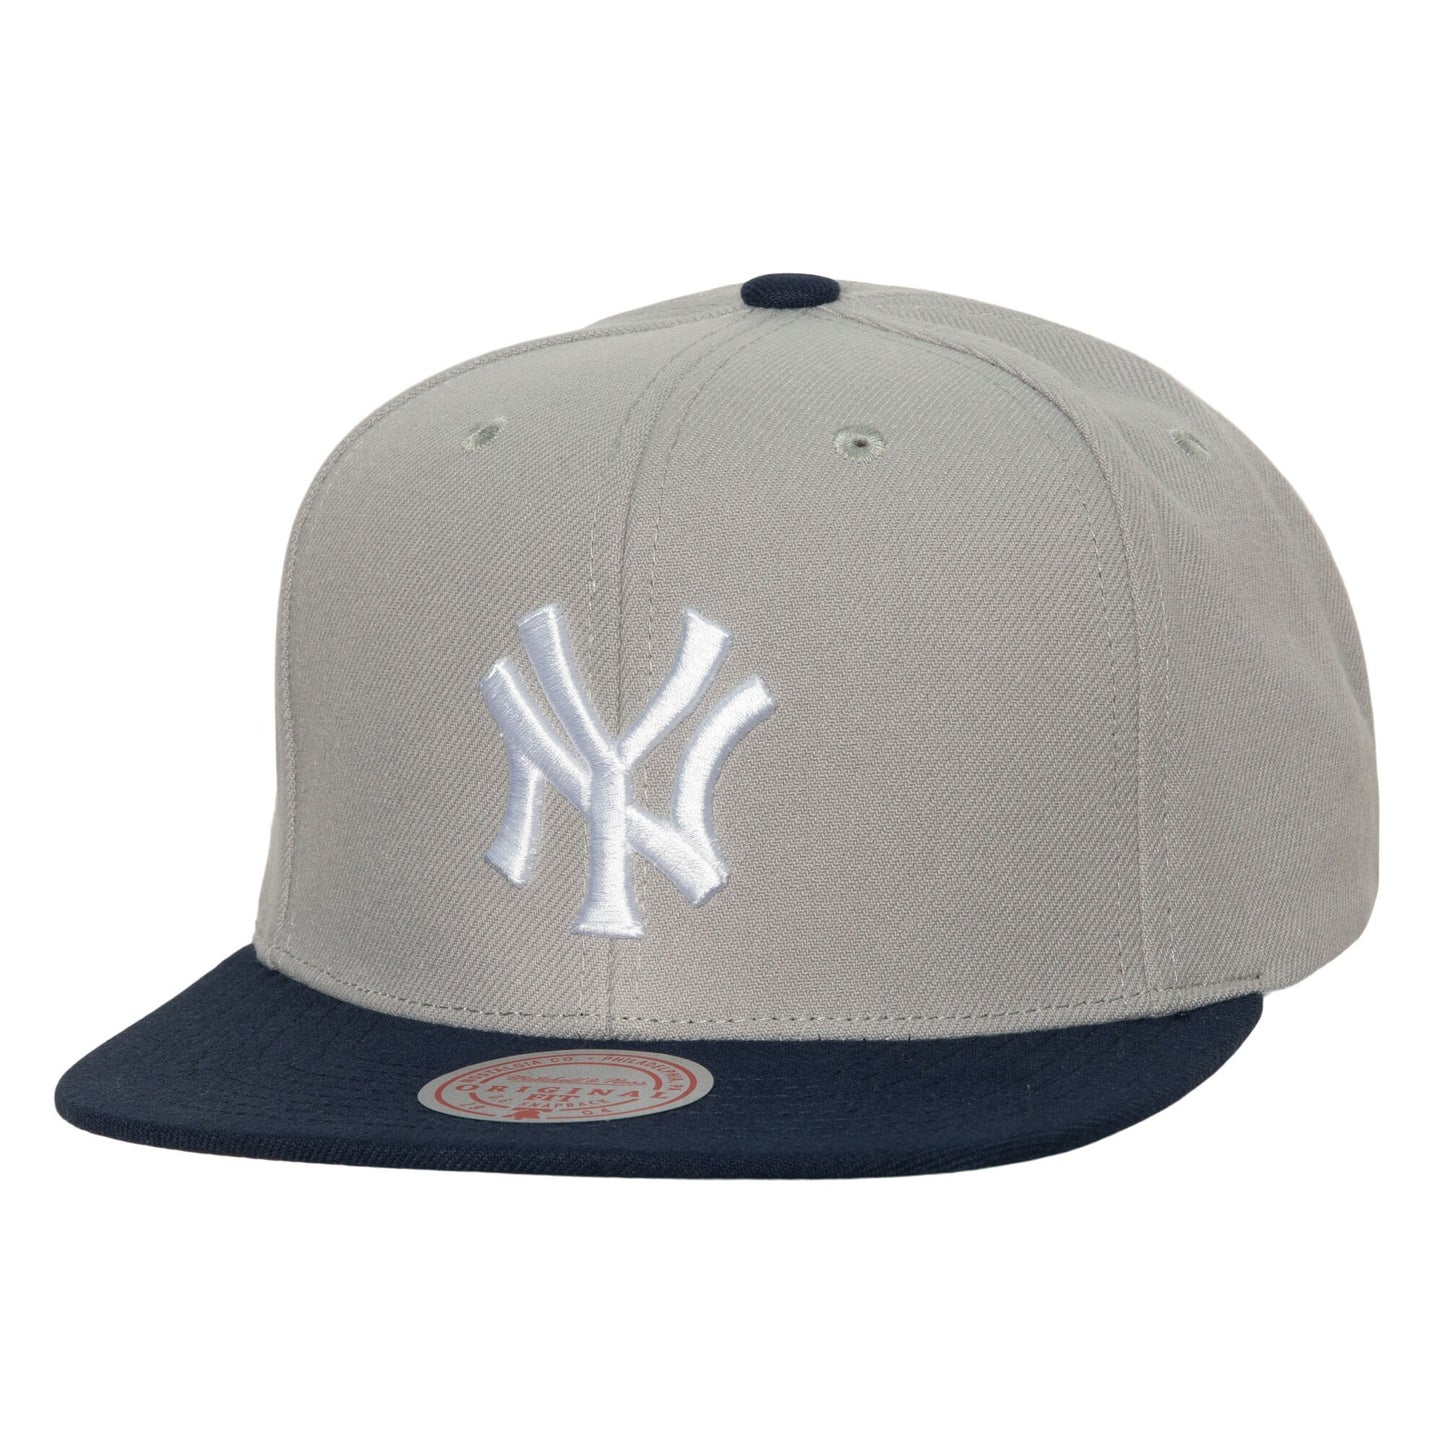 New York Yankees Mitchell & Ness Cooperstown Collection Away Snapback Hat - Gray